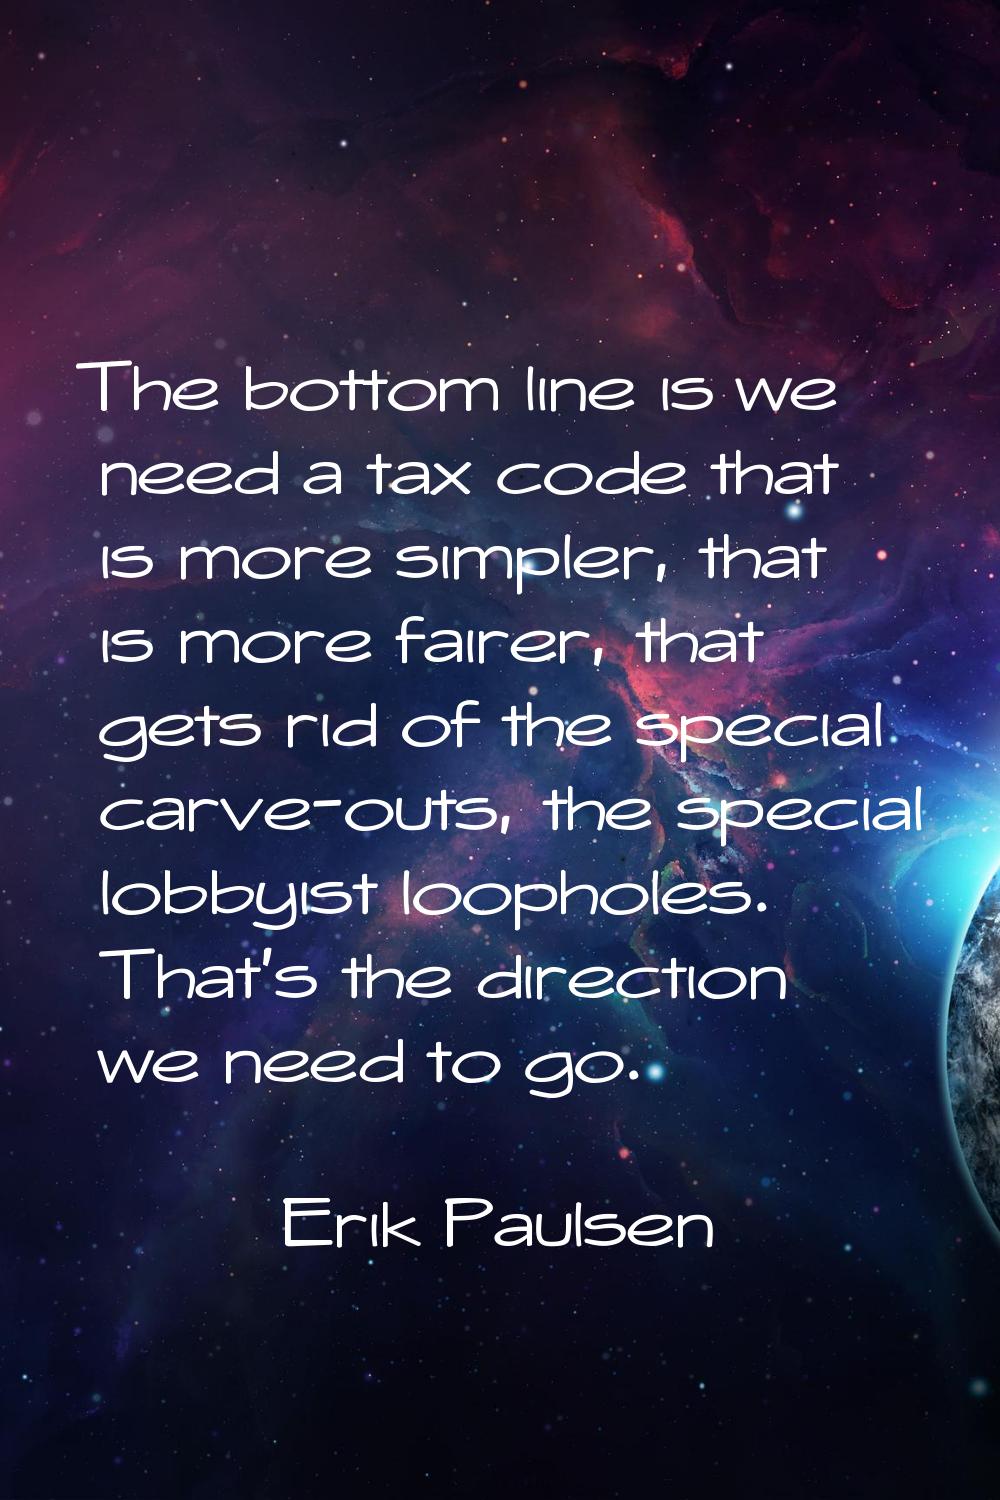 The bottom line is we need a tax code that is more simpler, that is more fairer, that gets rid of t